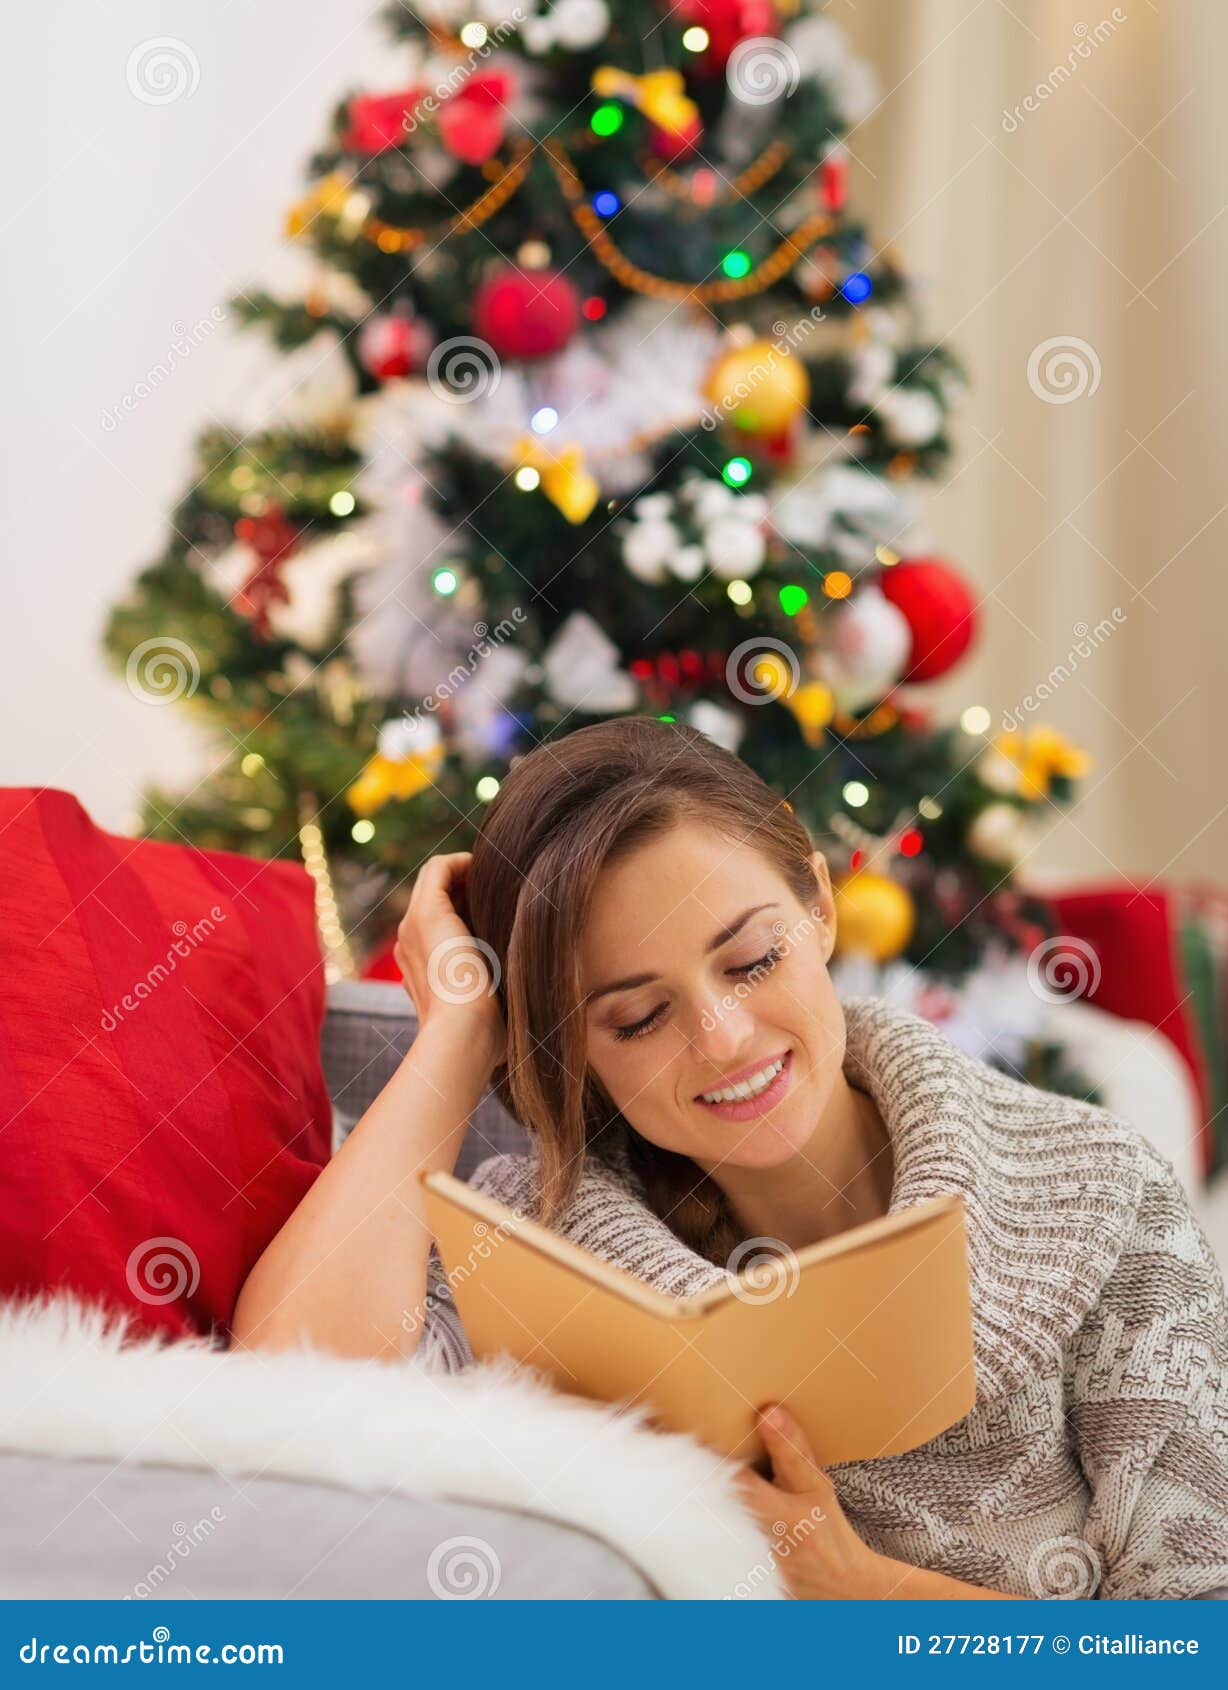 Young woman reading book near Christmas tree